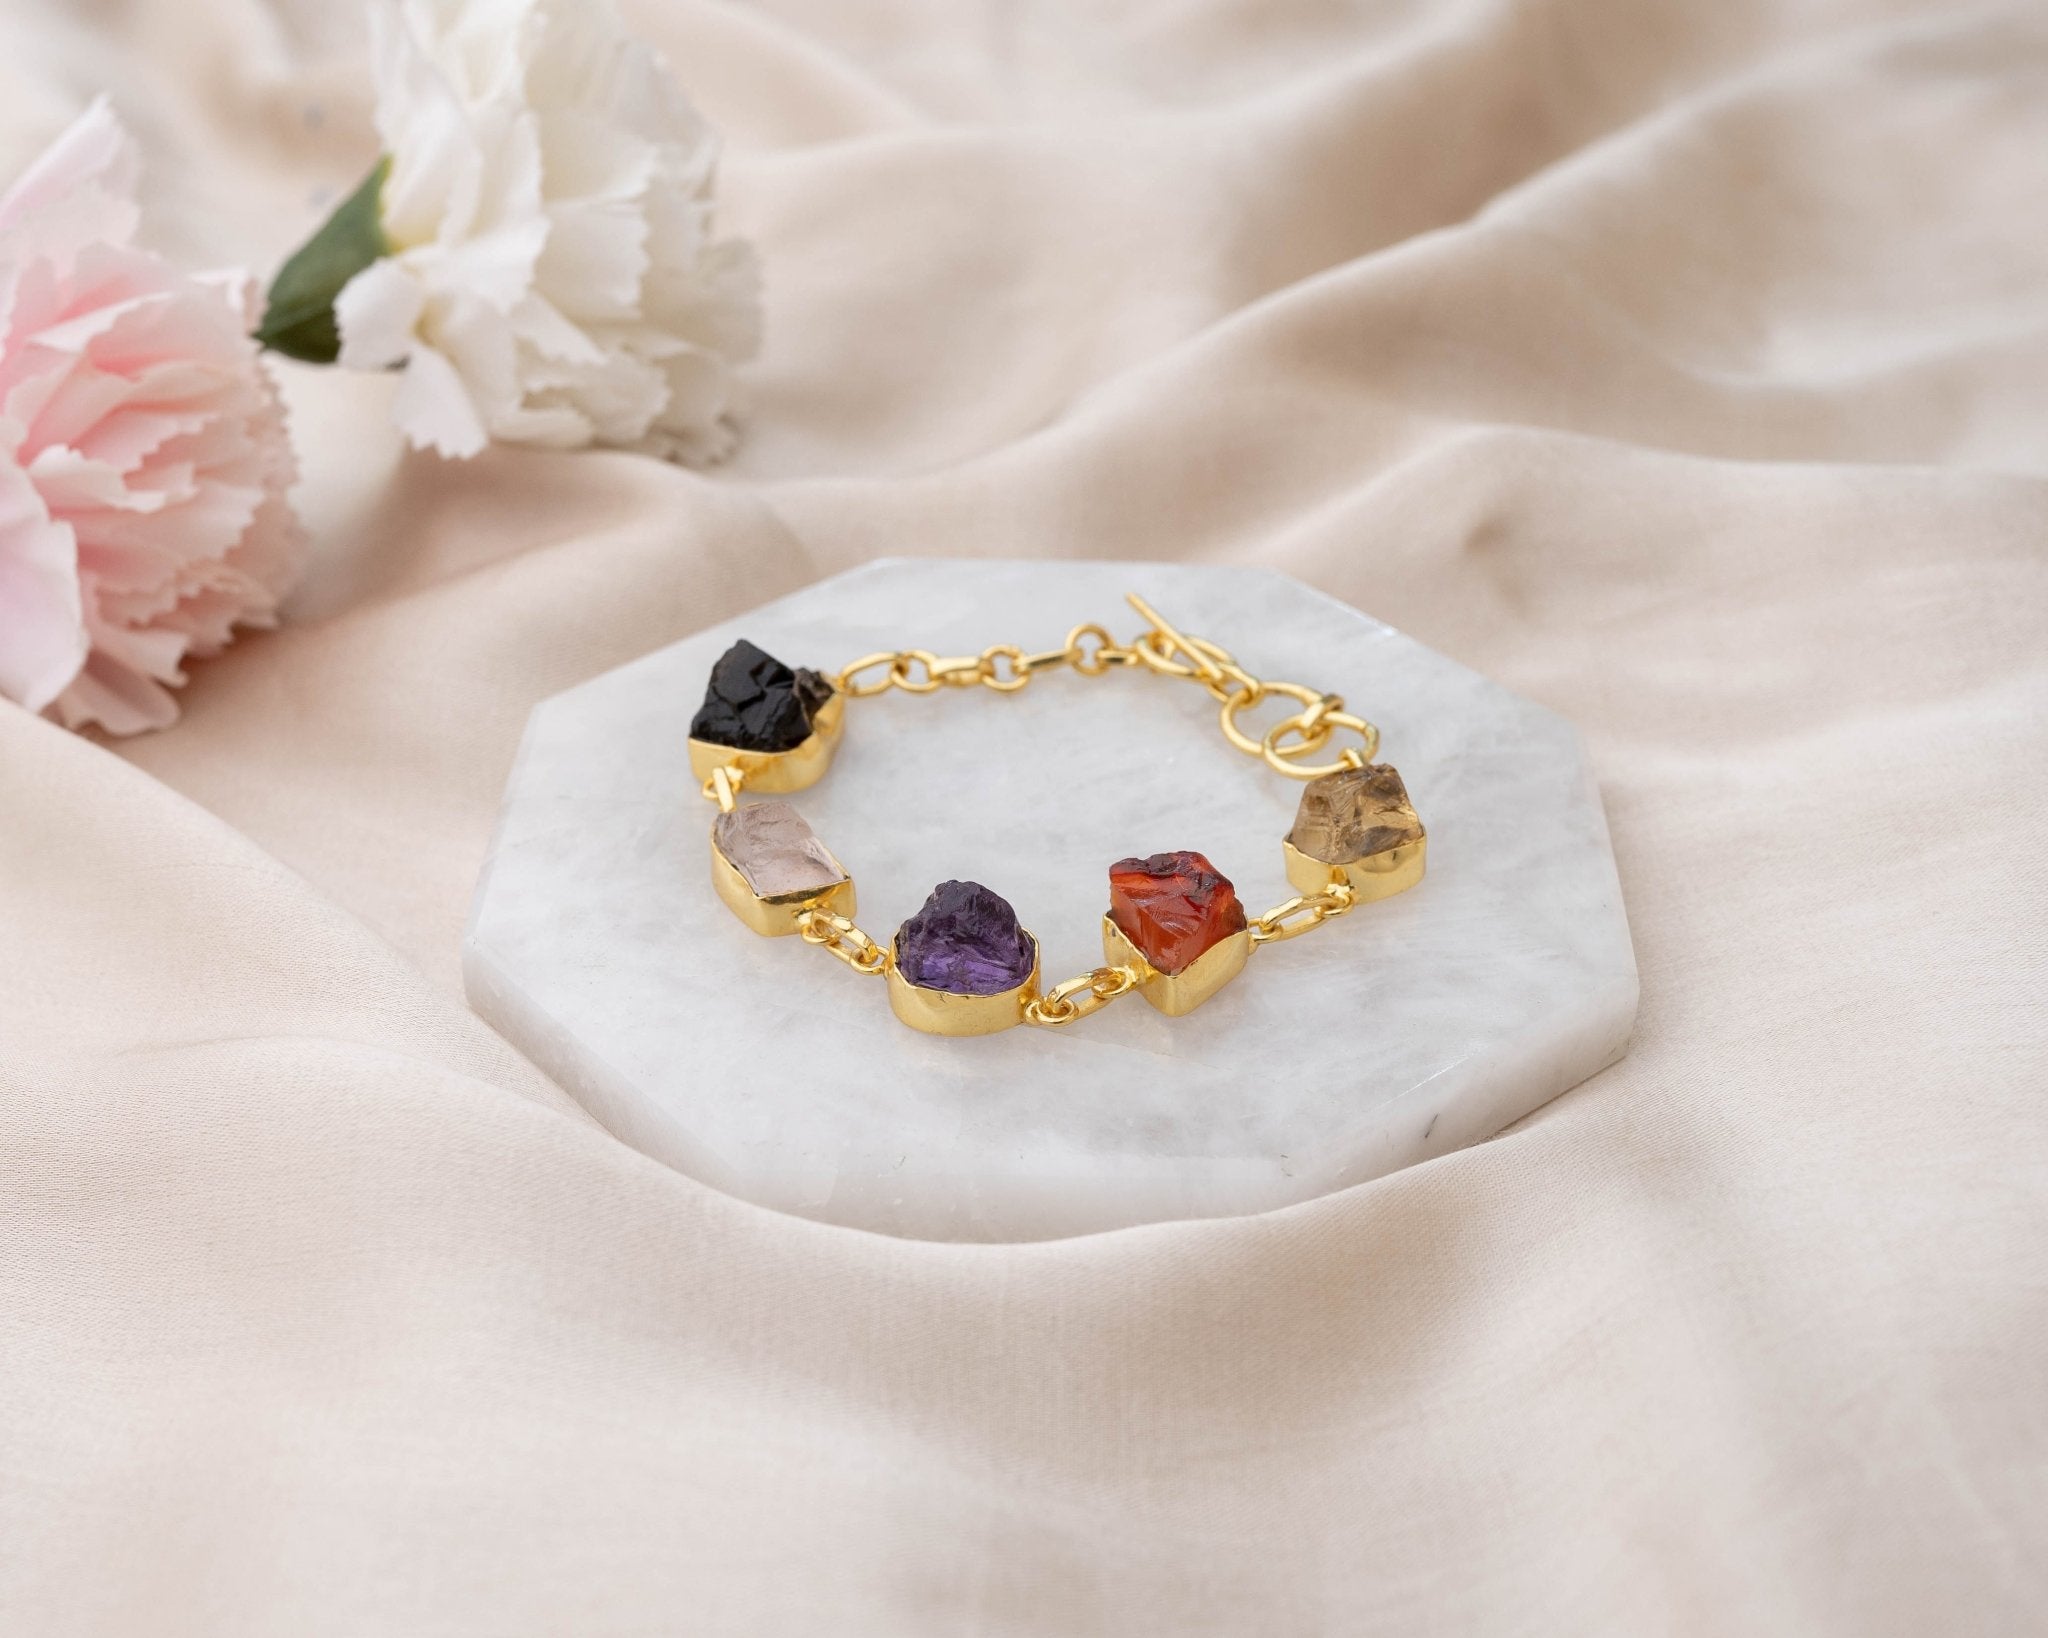 Hi everyone. I'm currently in the hunt of natural citrine bracelet. These  were posted by a crystal seller, claiming these are natural citrine and not  heat treated. What do you guys think? :